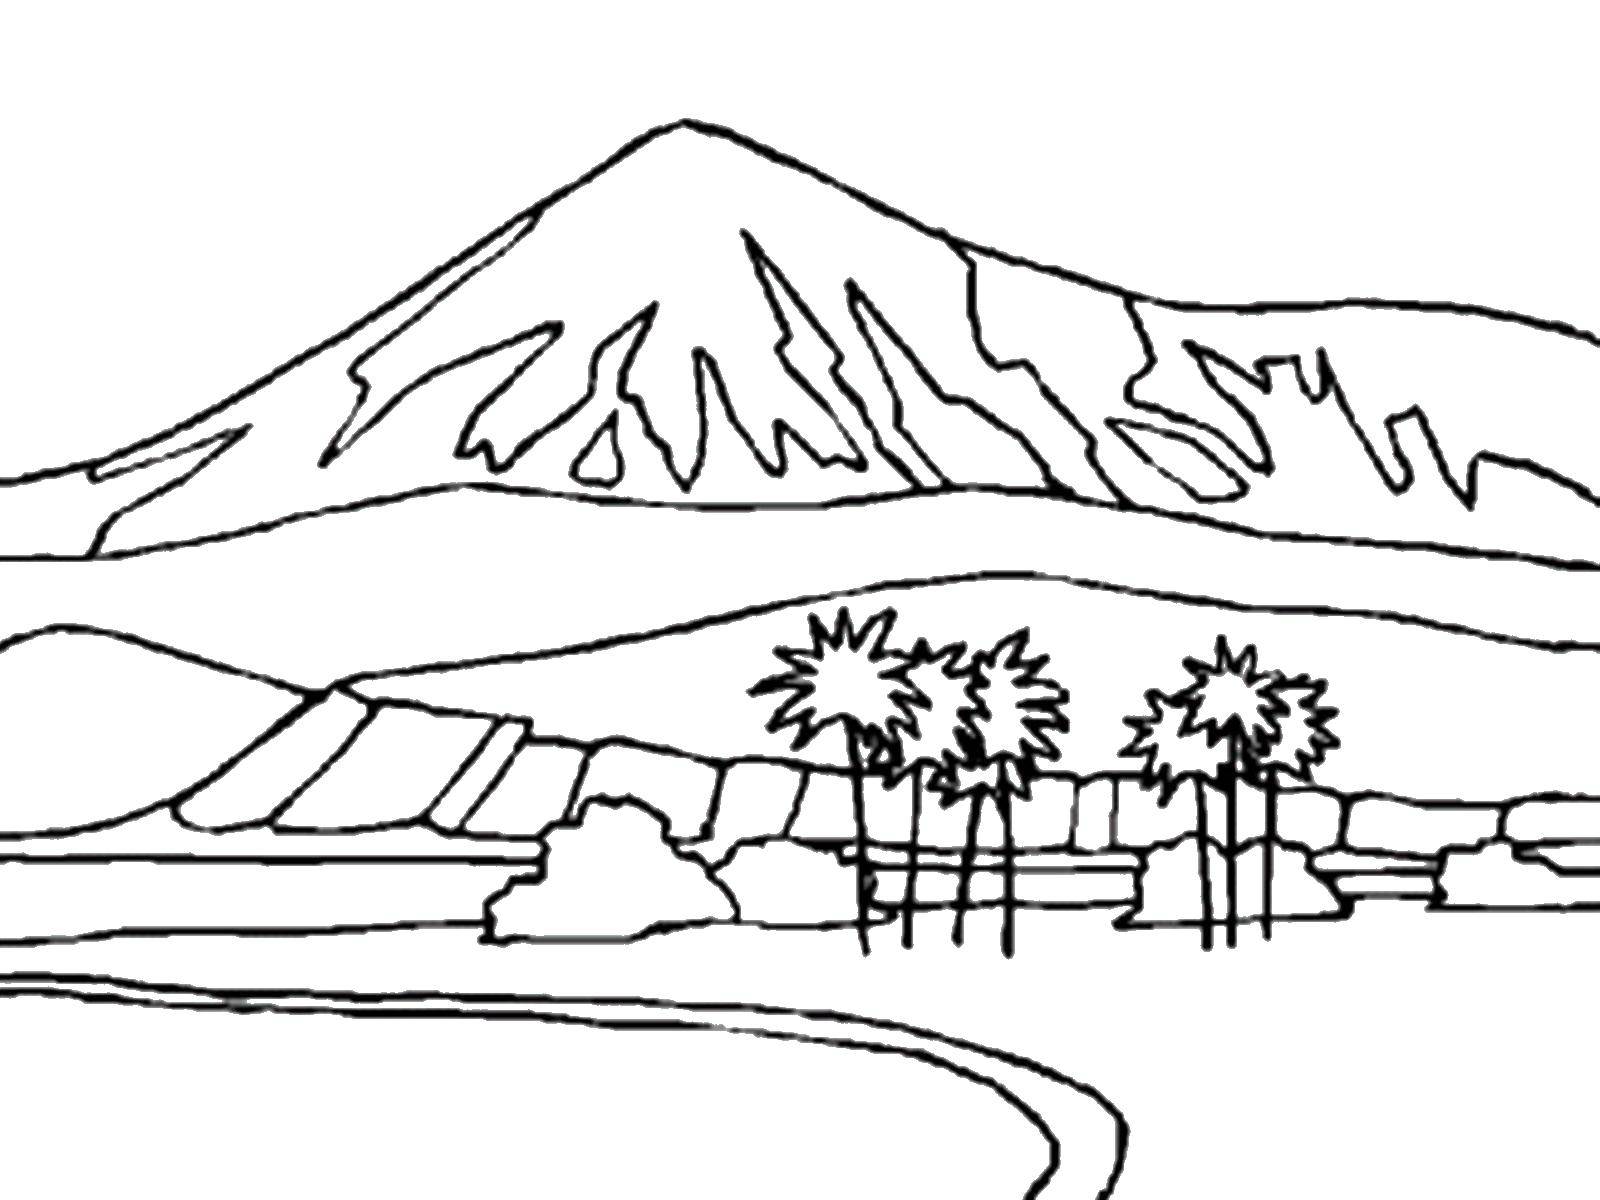 Coloring Mountain and palm trees. Category Nature. Tags:  mountains, palm trees.